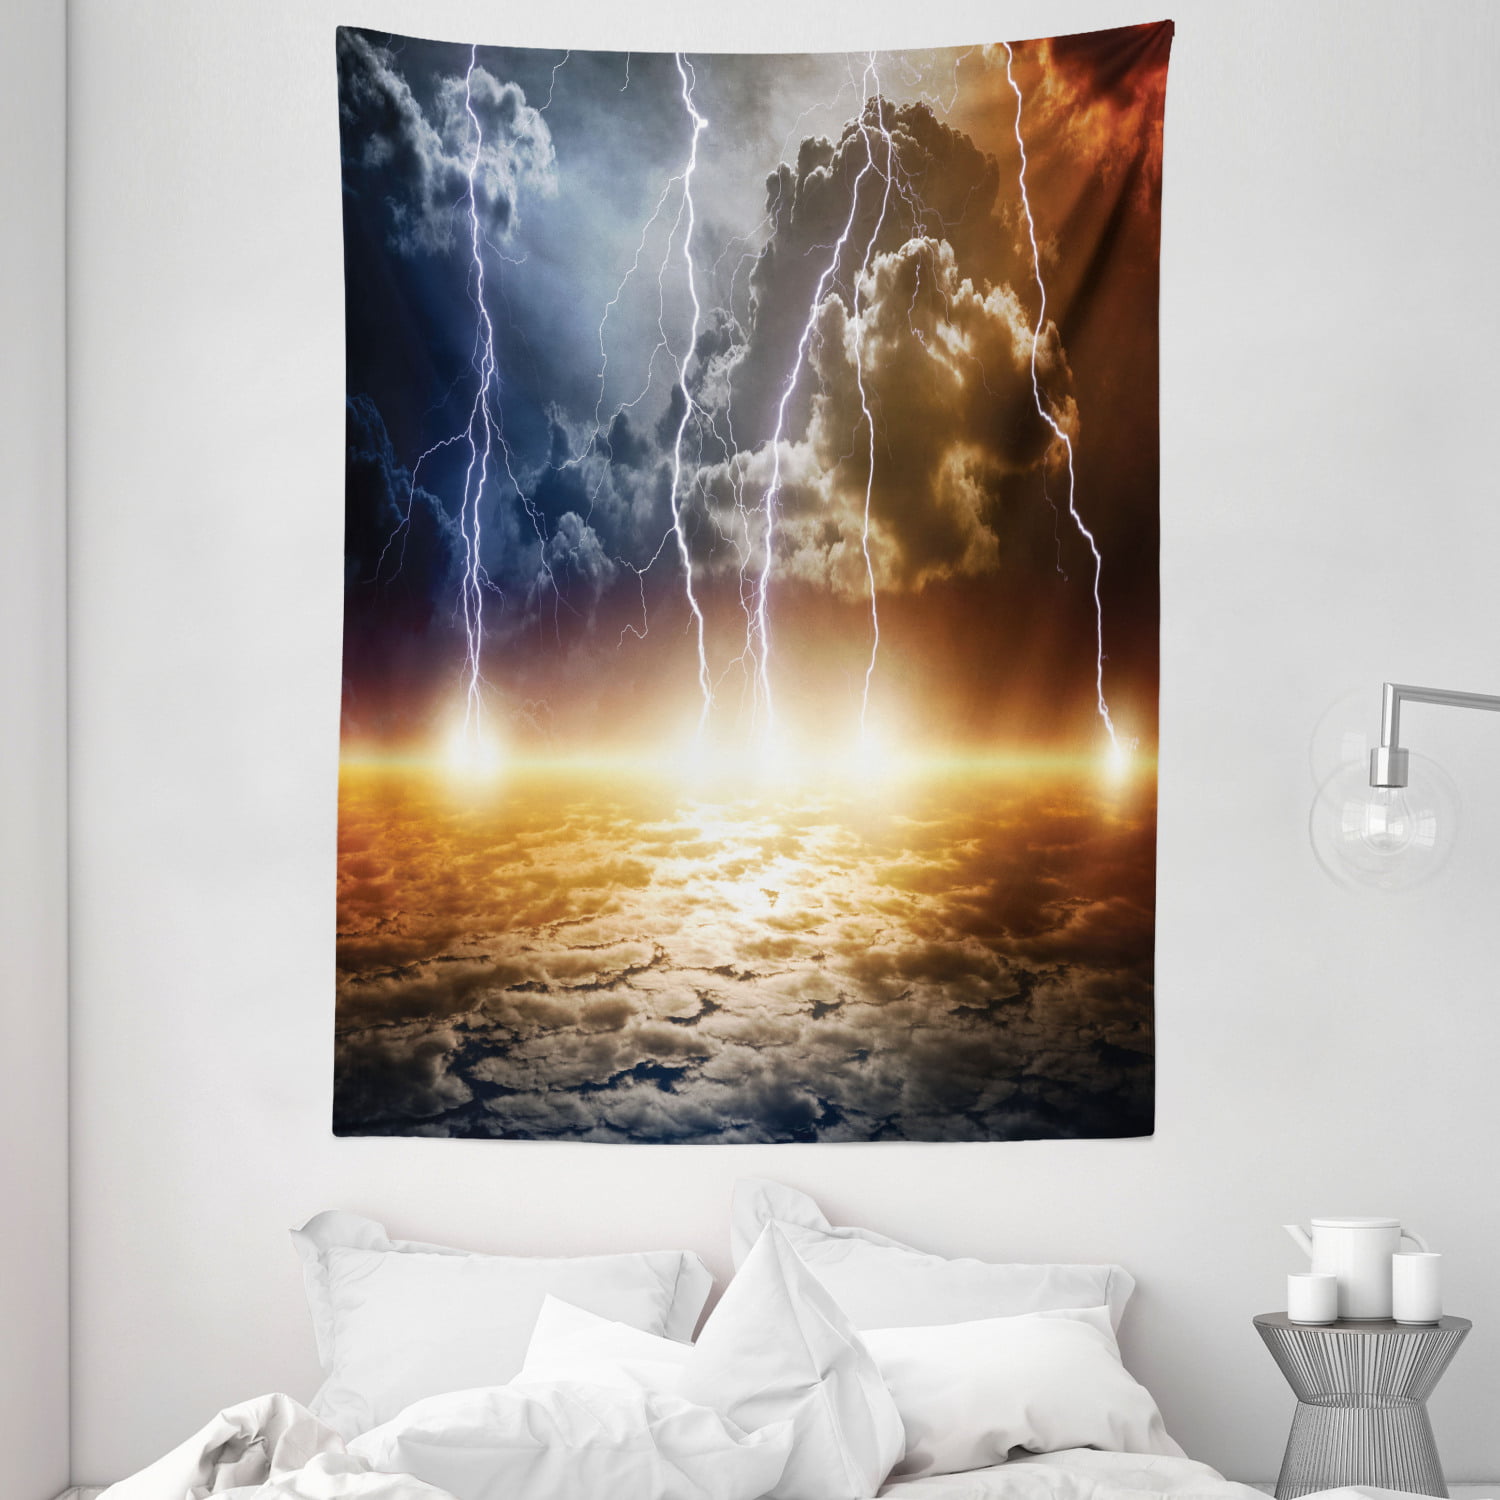 Lightning Storm Wall Hanging Tapestry Psychedelic Bedroom Home Decoration